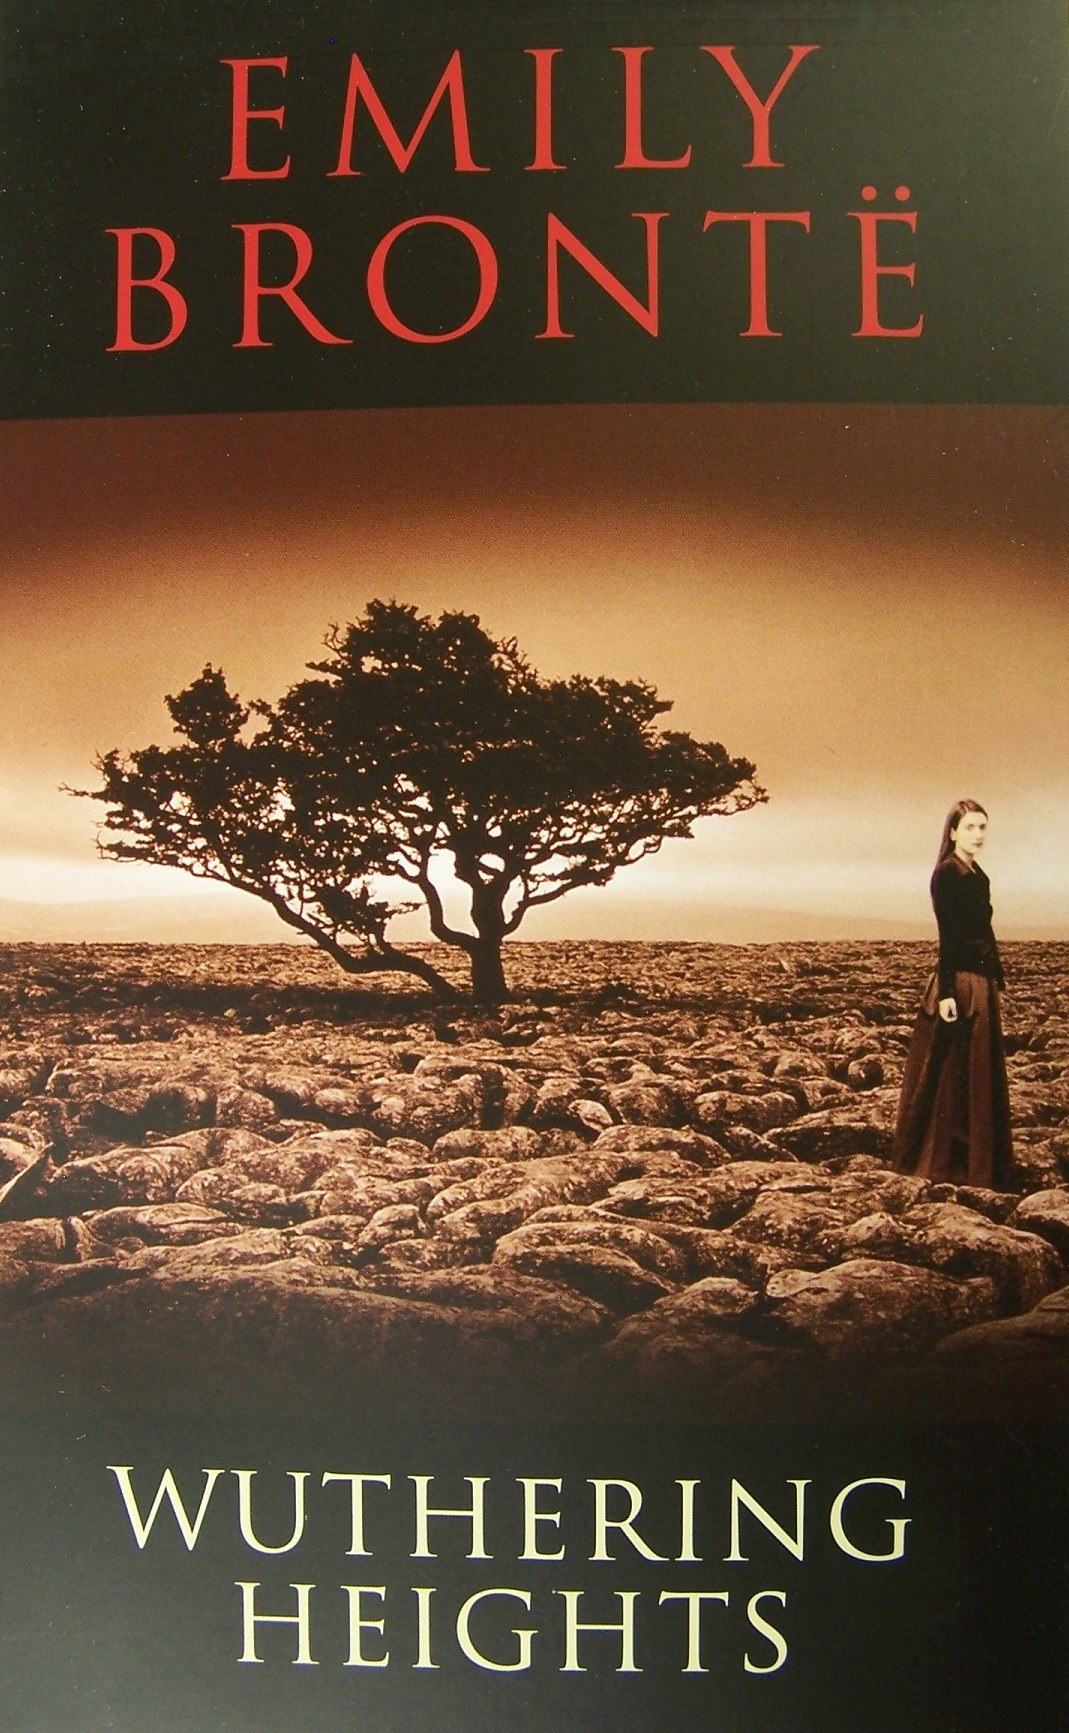 Wuthering Heights, by Emily Bronte - interesting book to read